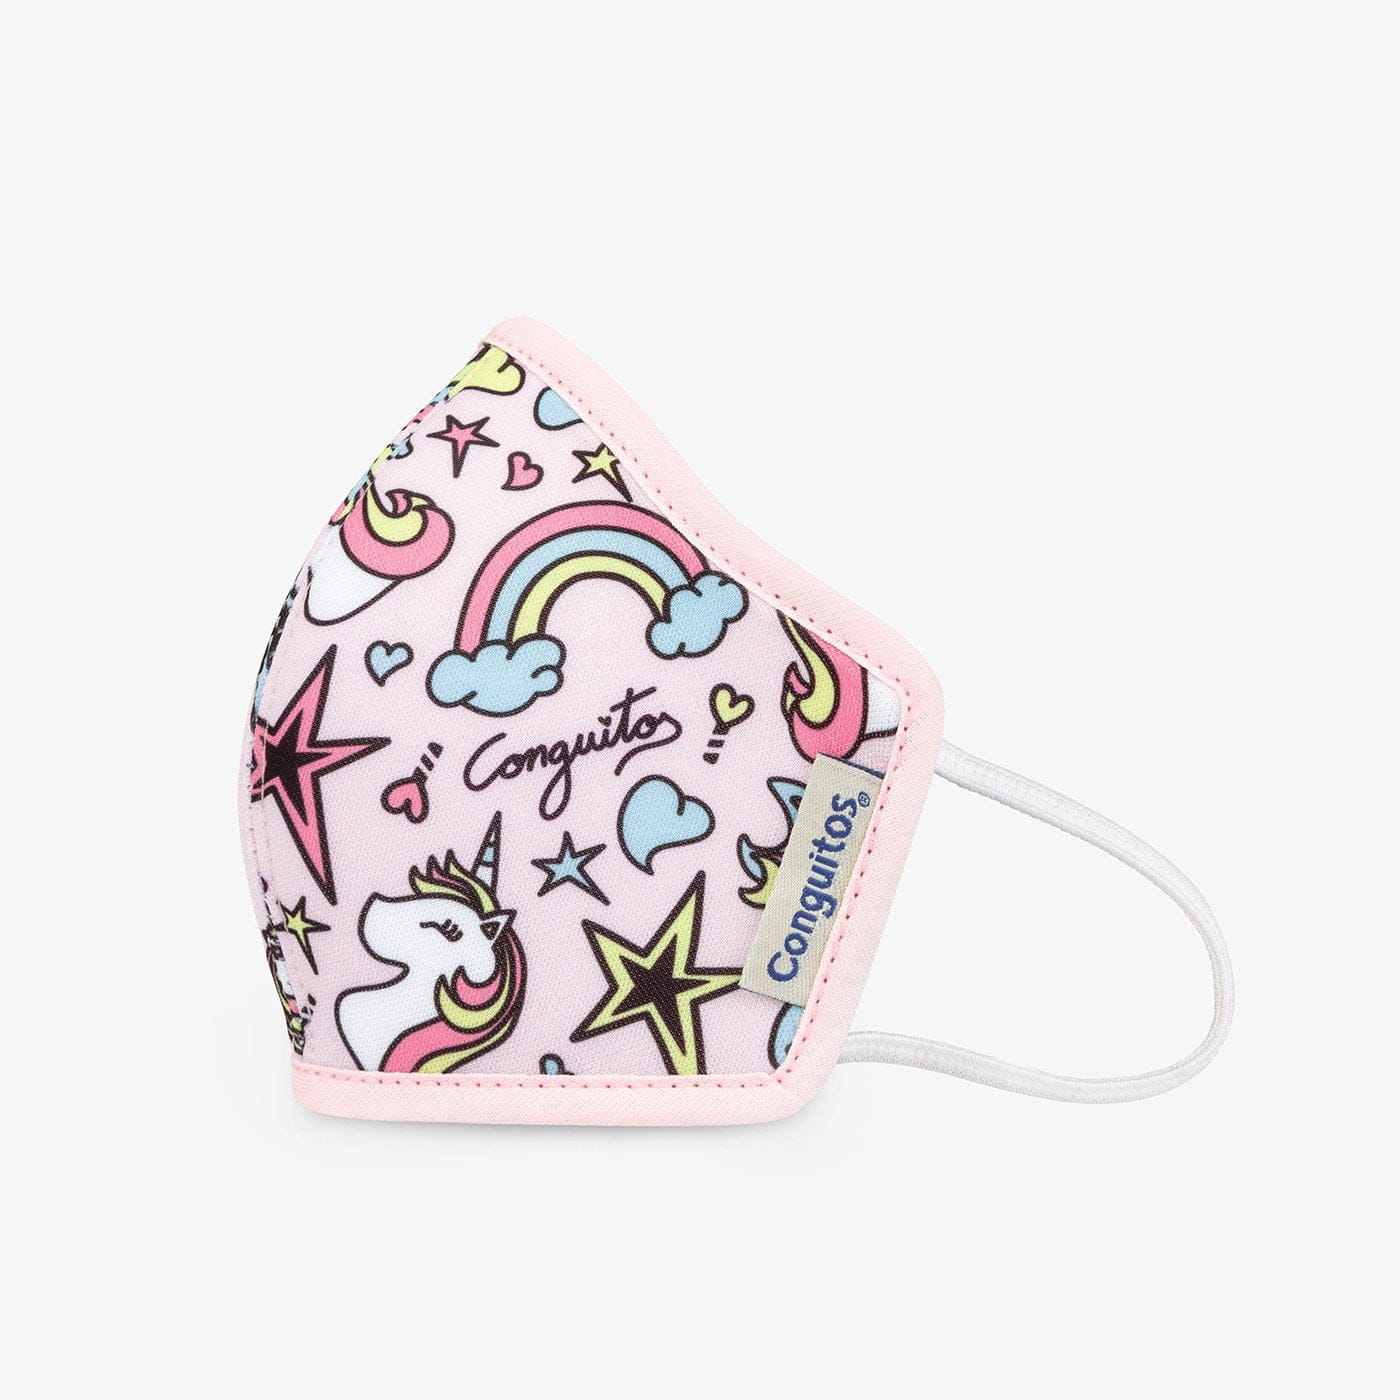 CONGUITOS Accessories Child's Unicorn Certified Mask